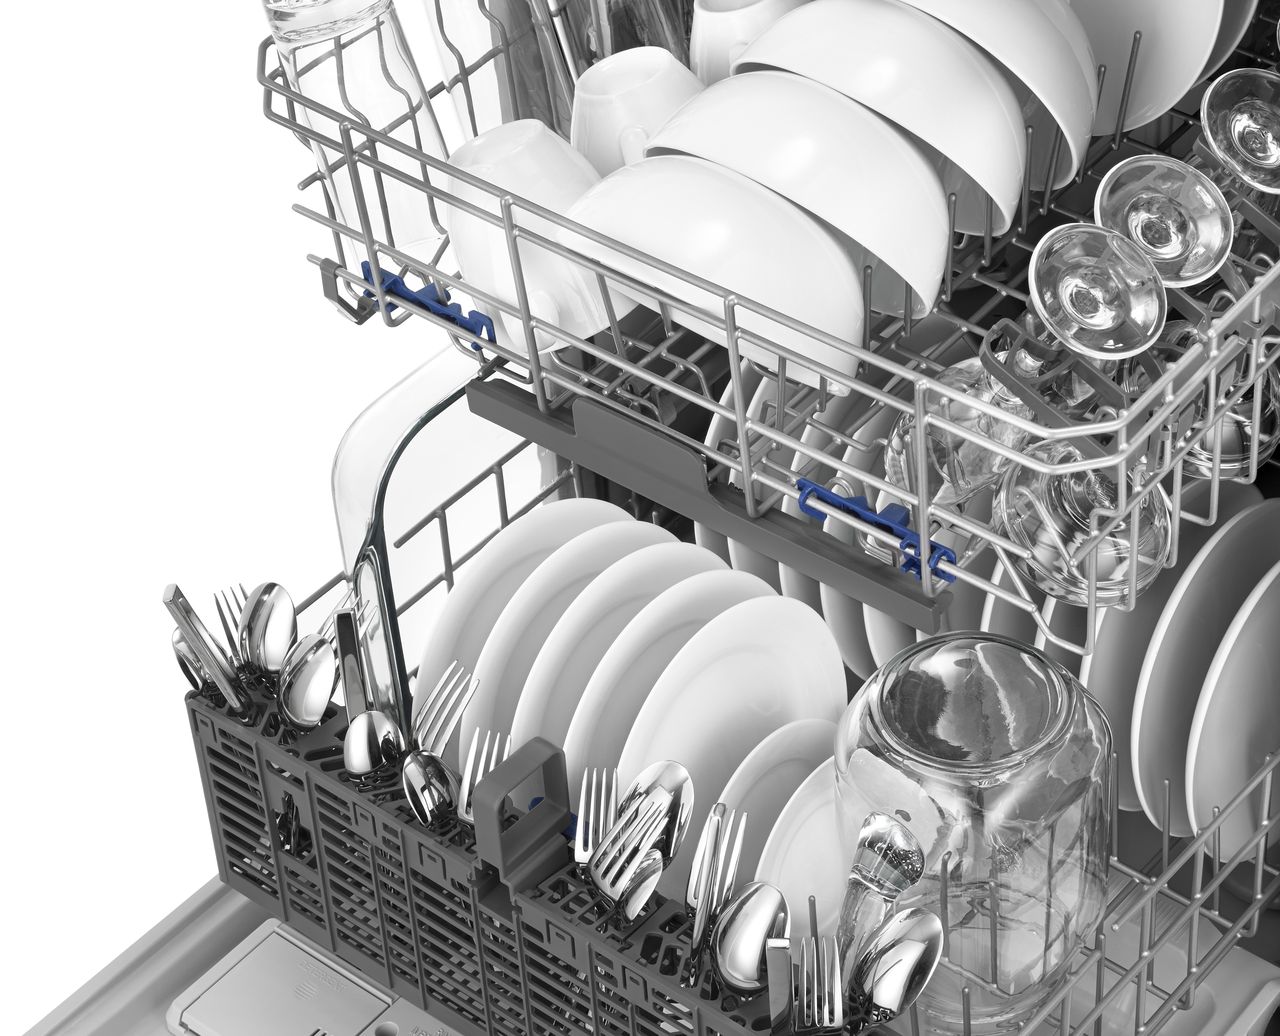 Why Are Your Dishwasher Racks Sticking